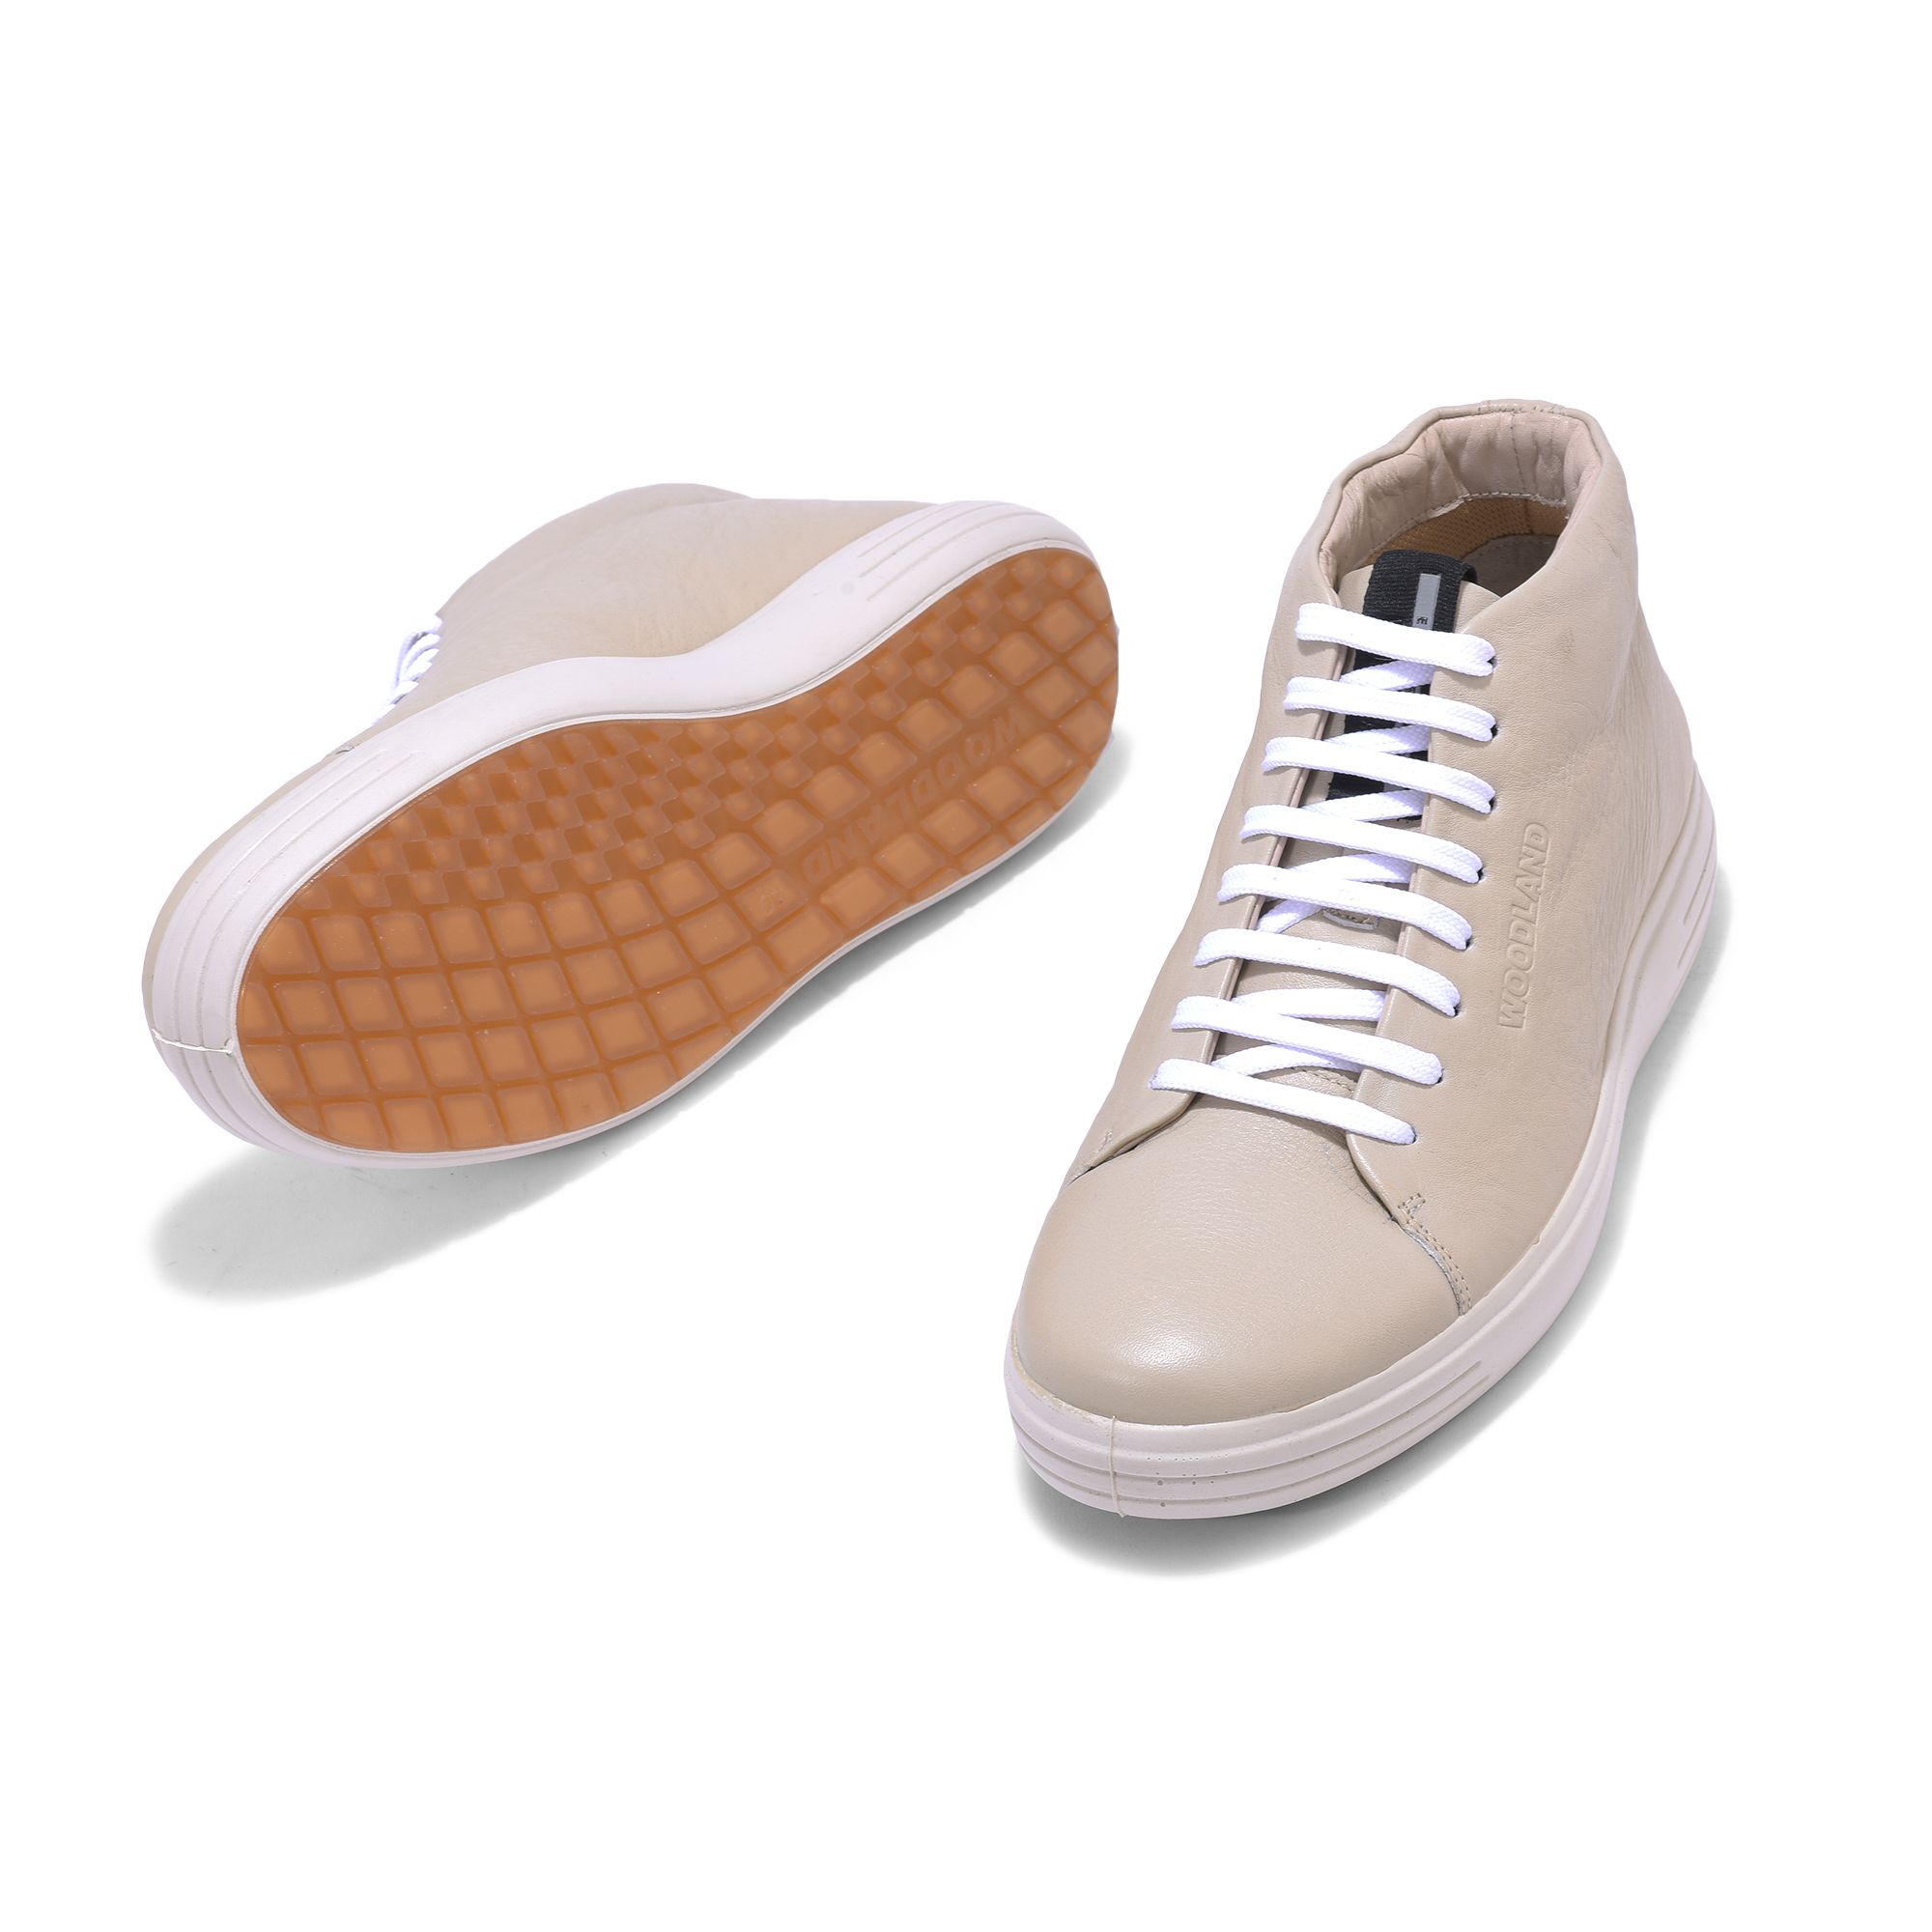 Woodland Dove White casual sneakers